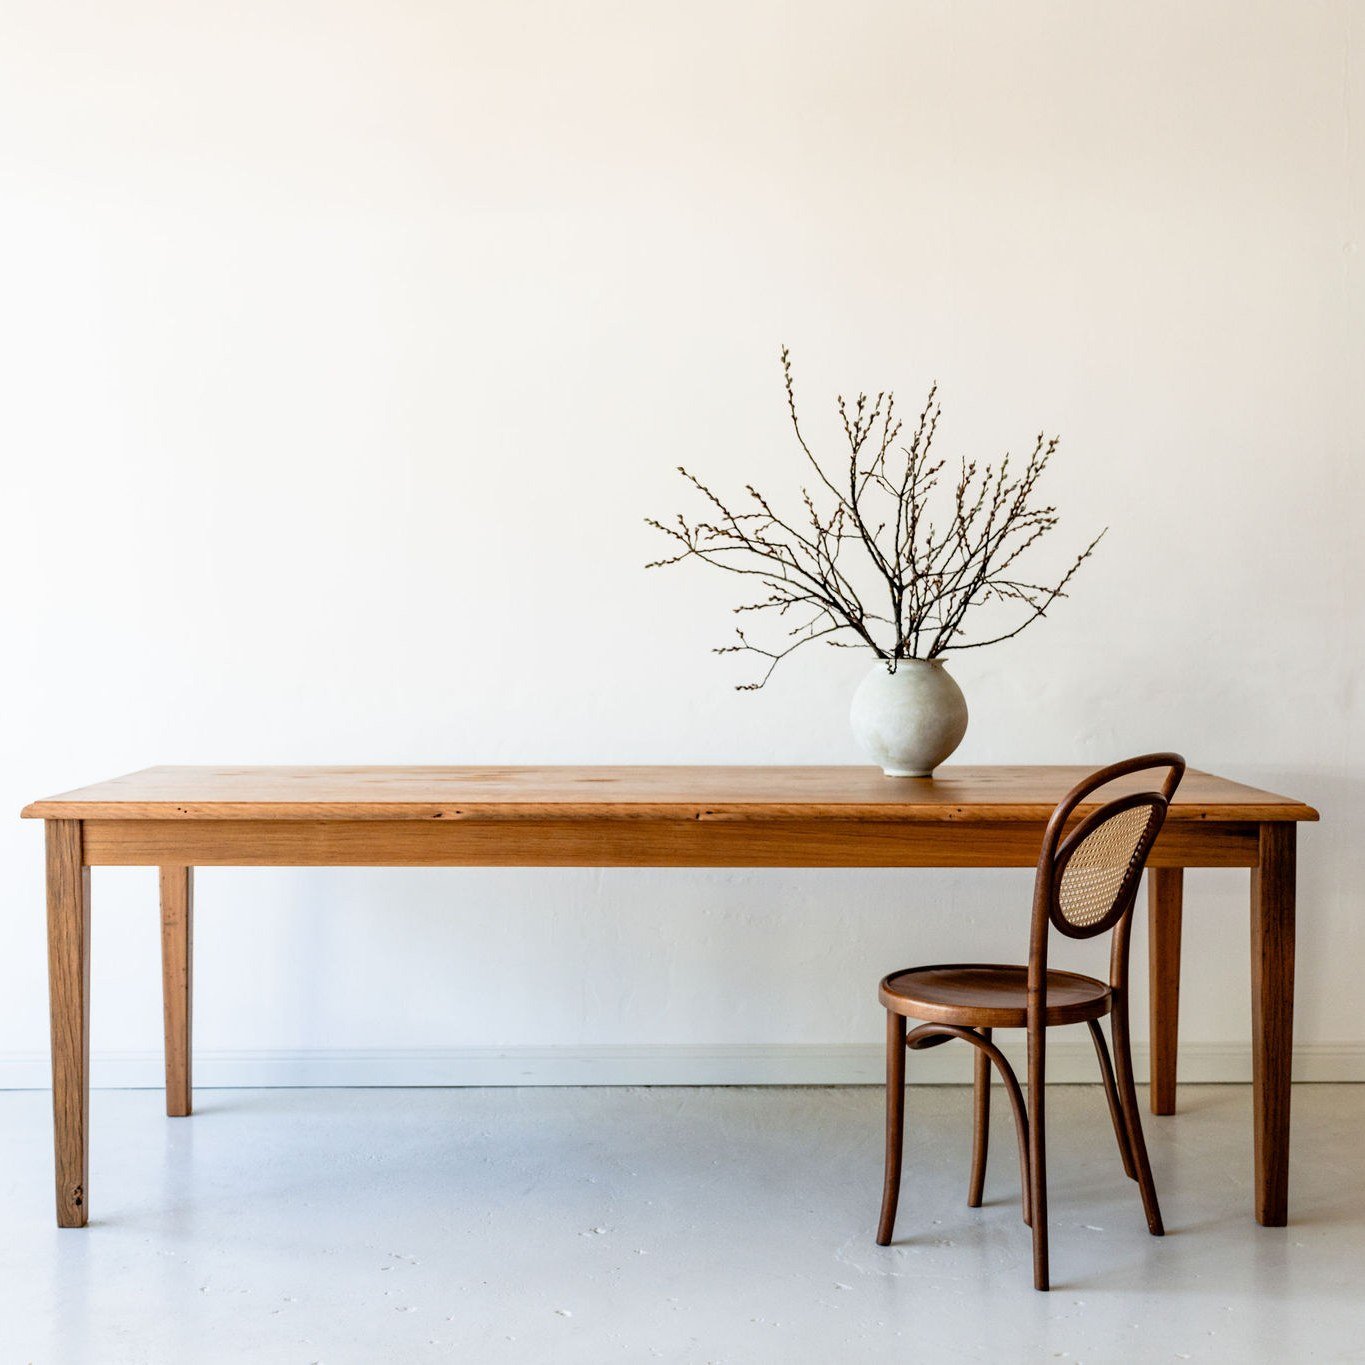 Our Lillian dining table like always is made from recycled Australian hardwood. This package was salvaged from Marsden High School and is believed to be Blackbutt. It has an open straight grain with slightly interlocking and when finished with our si